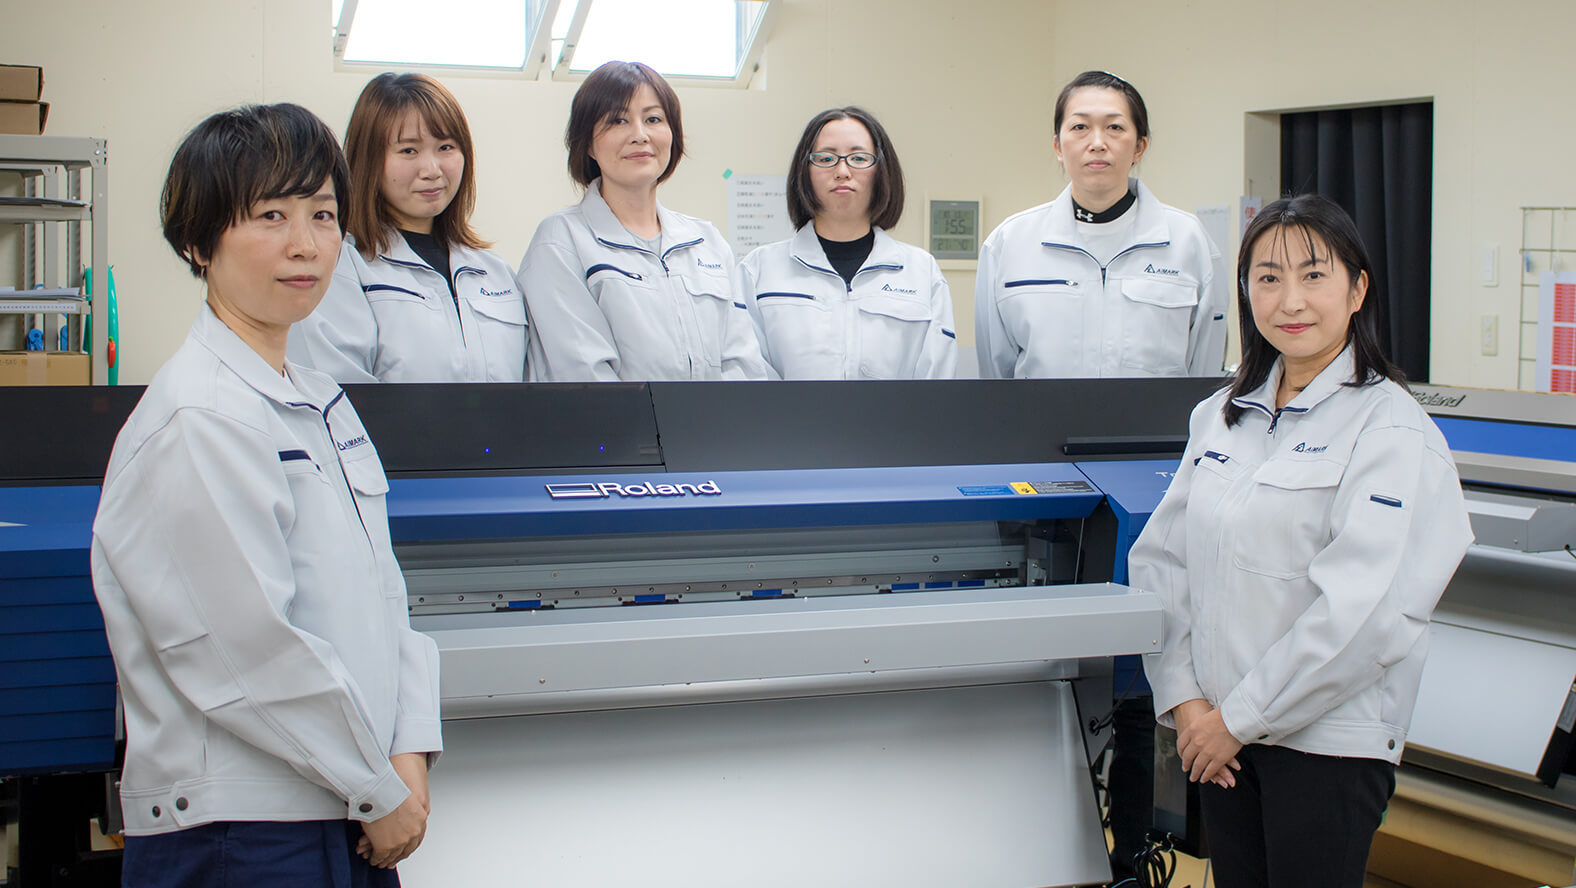 AIMARK President Seiko Kayakabe (front right), Shiho Fujiwara (front left) who is in charge of printing operations and staff members